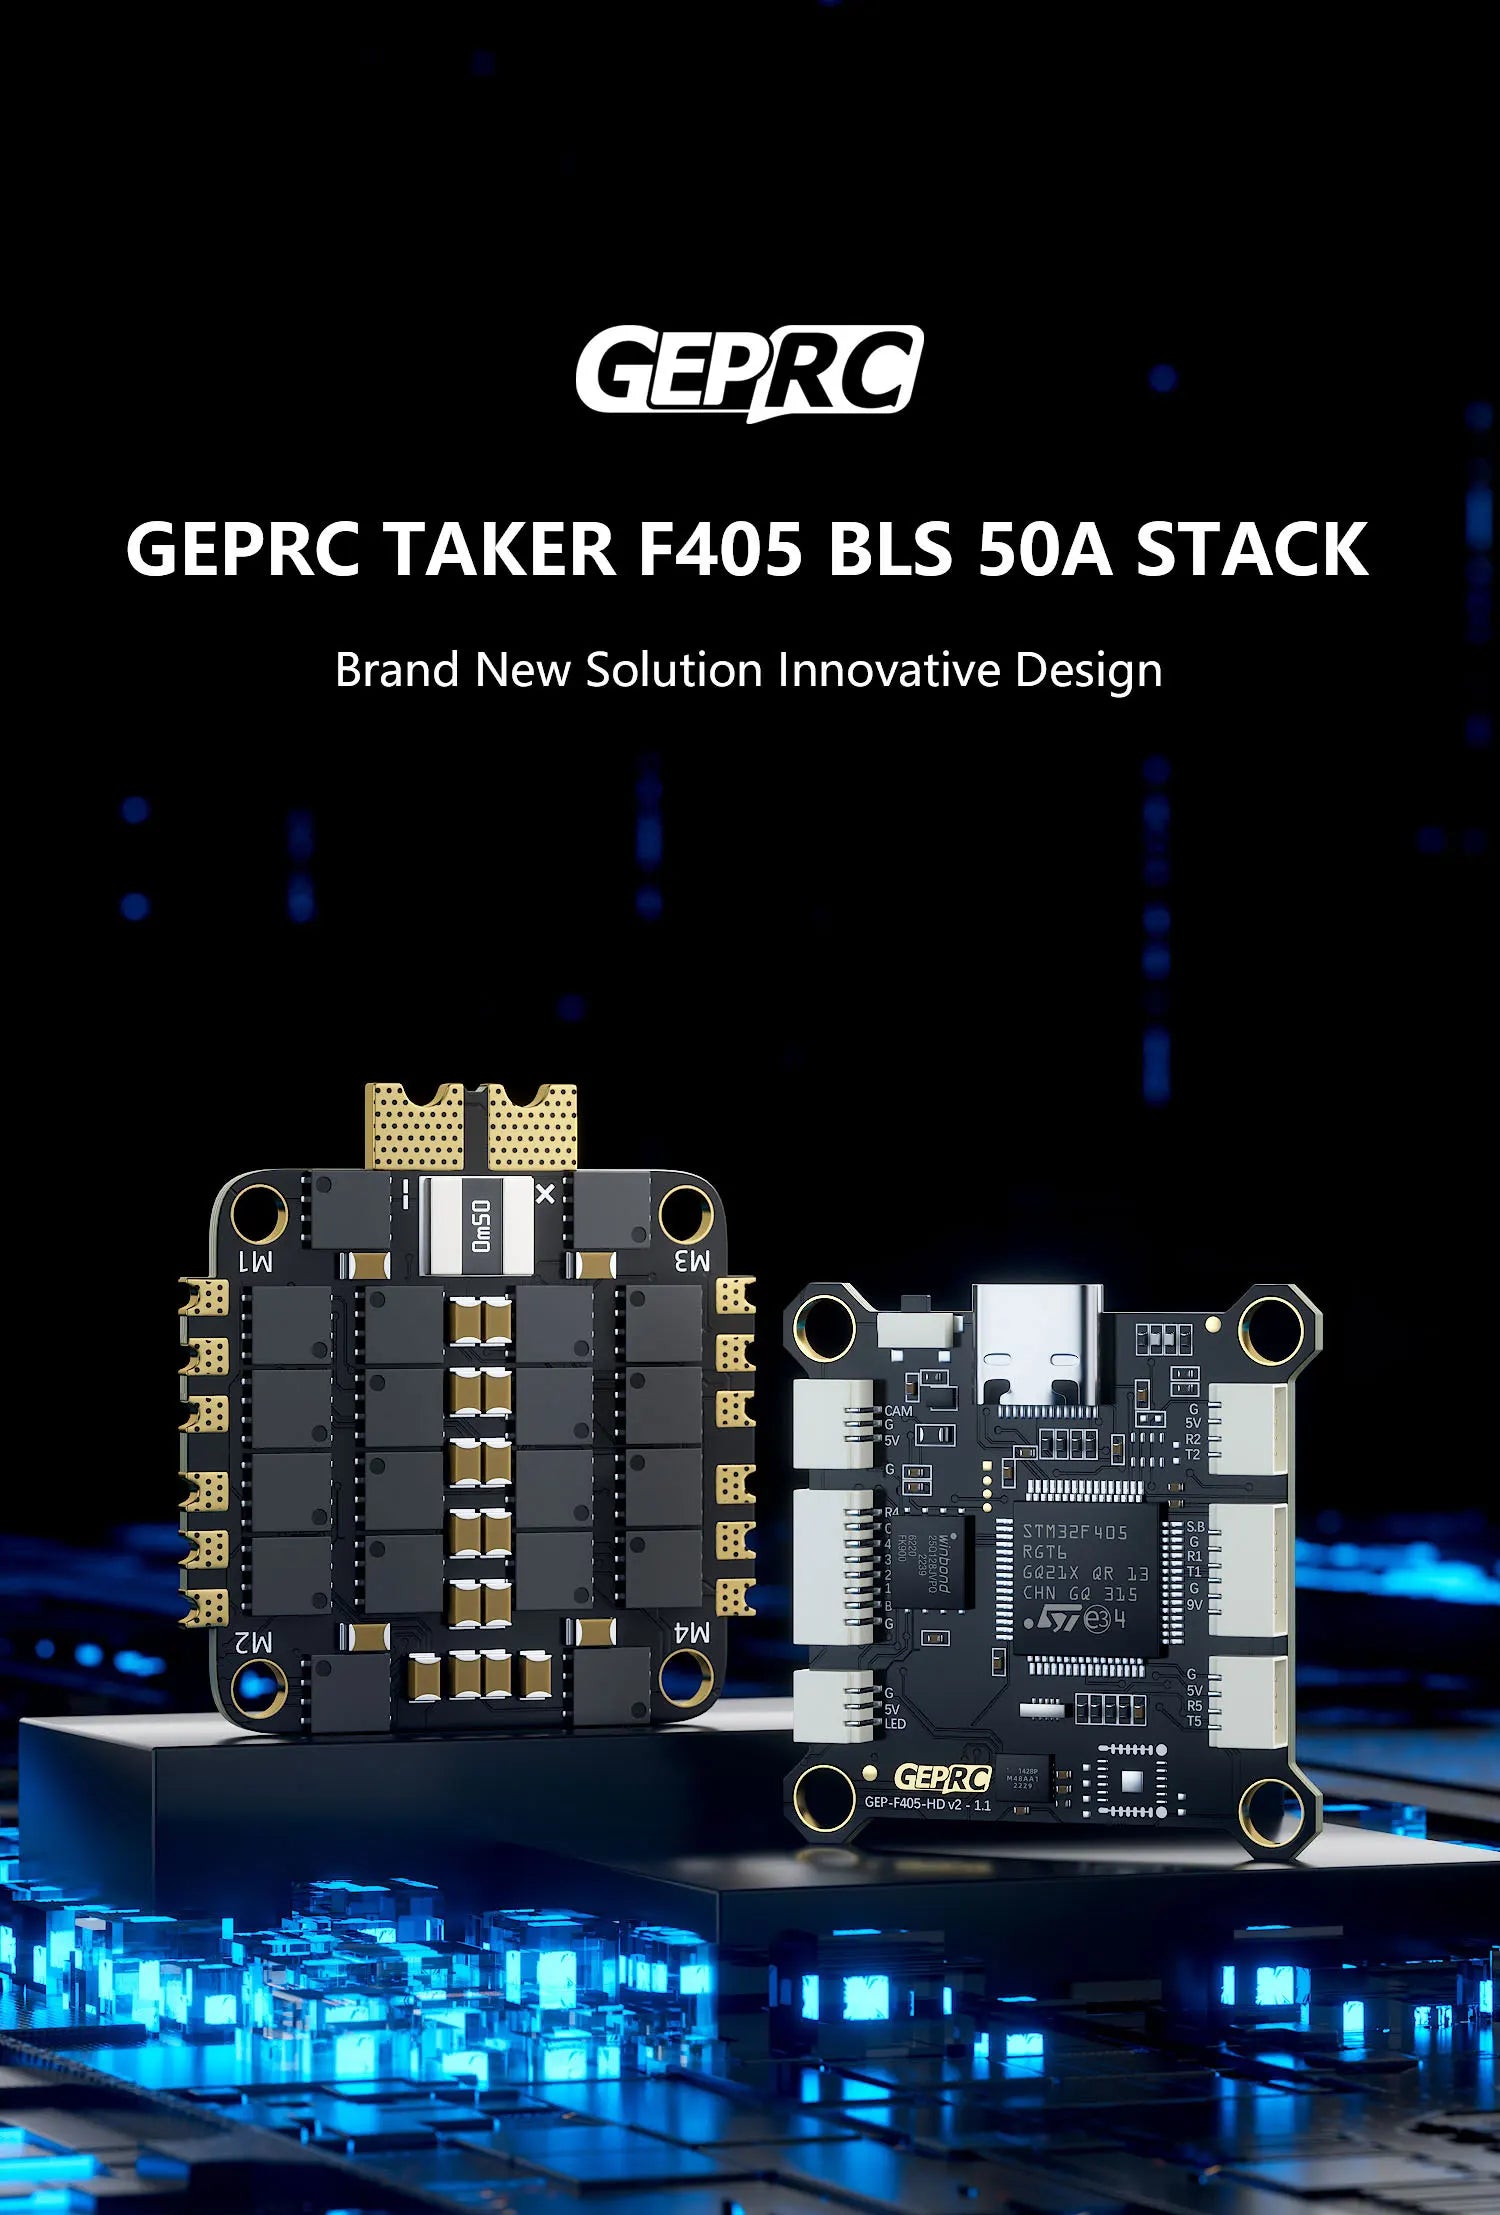 GEPRC TAKER F405 BLS 50A Stack, upgrade the type-C USB connector, which greatly improves the service life of the socket 